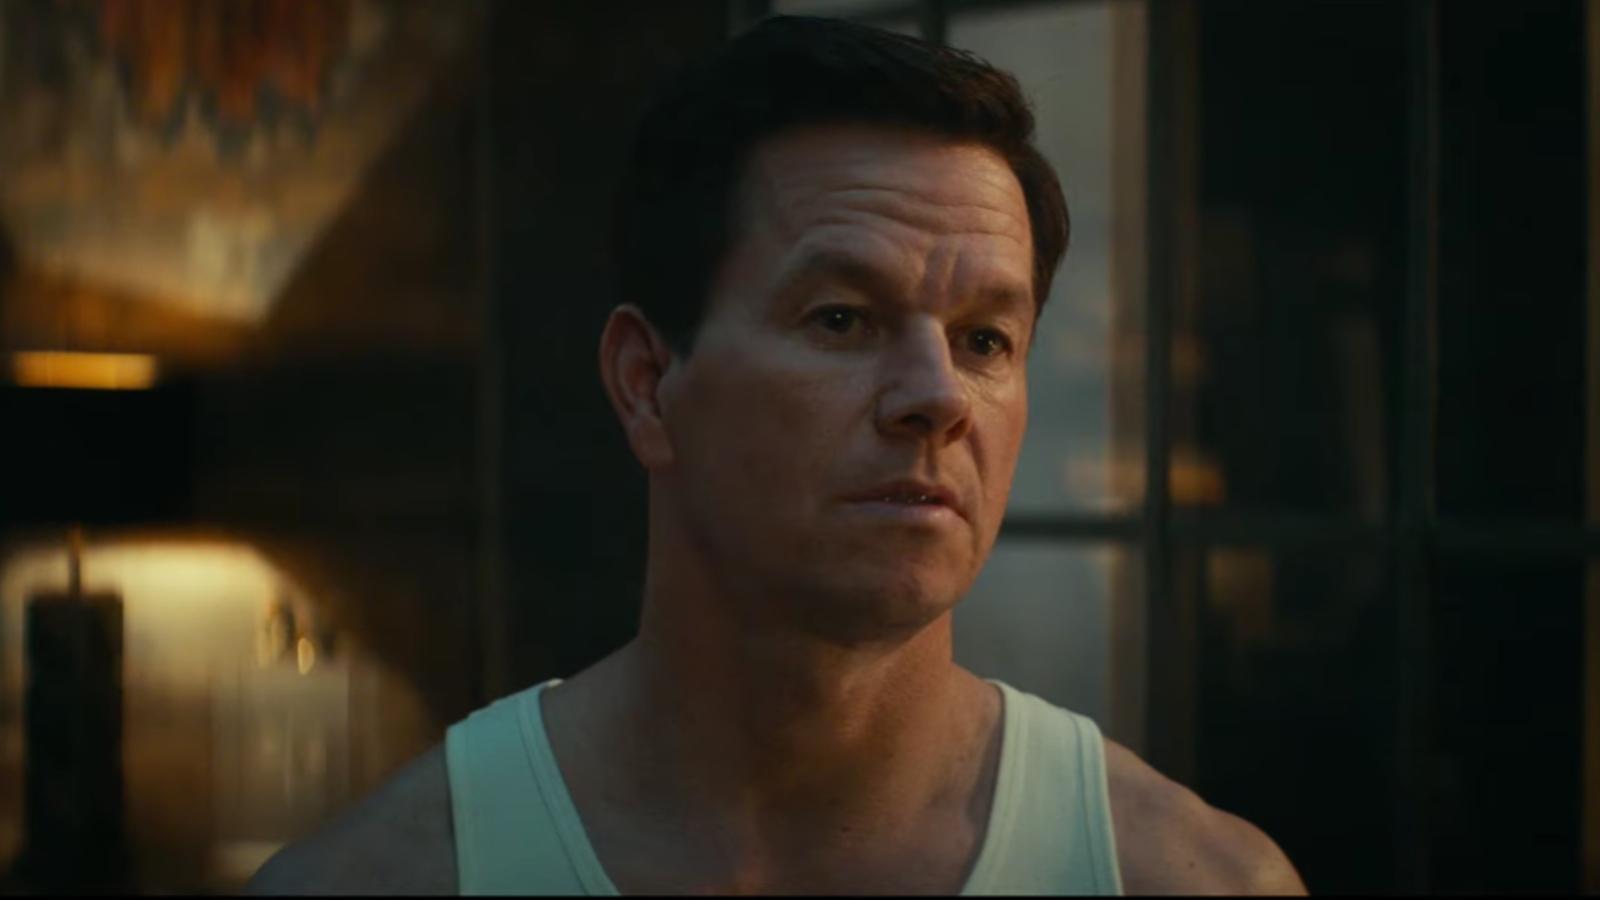 Uncharted starring Tom Holland and Mark Wahlberg also features